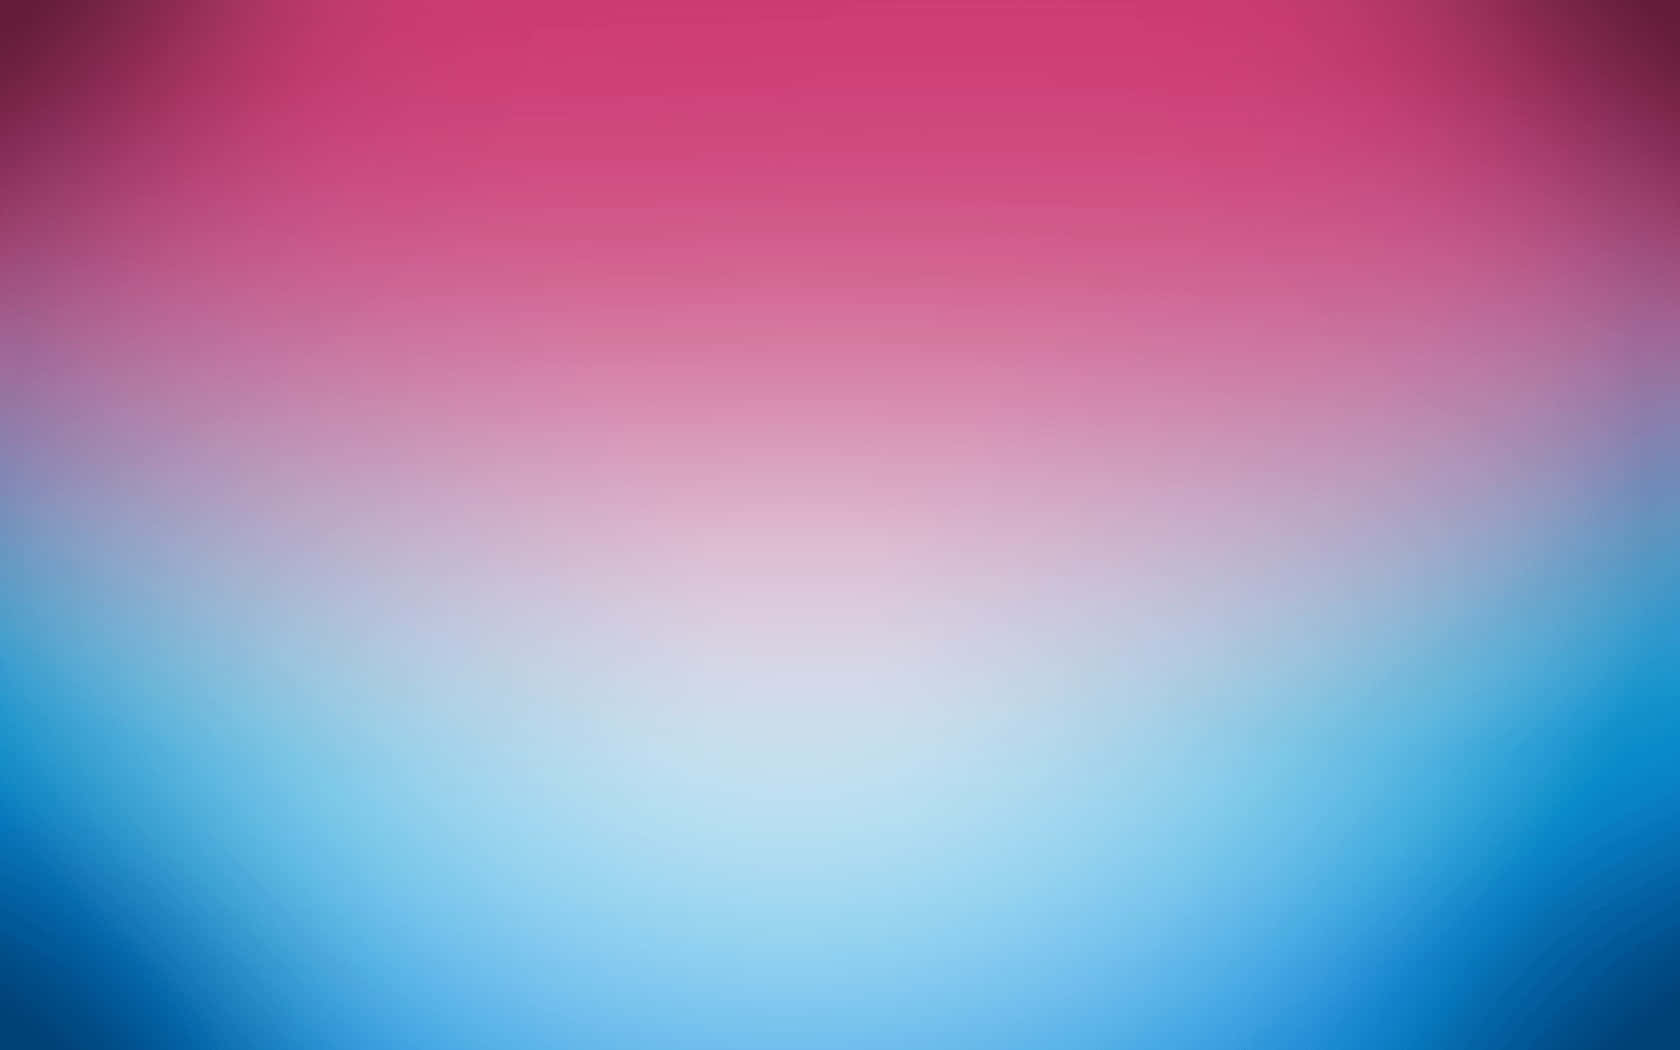 A Blue And Pink Blurred Background